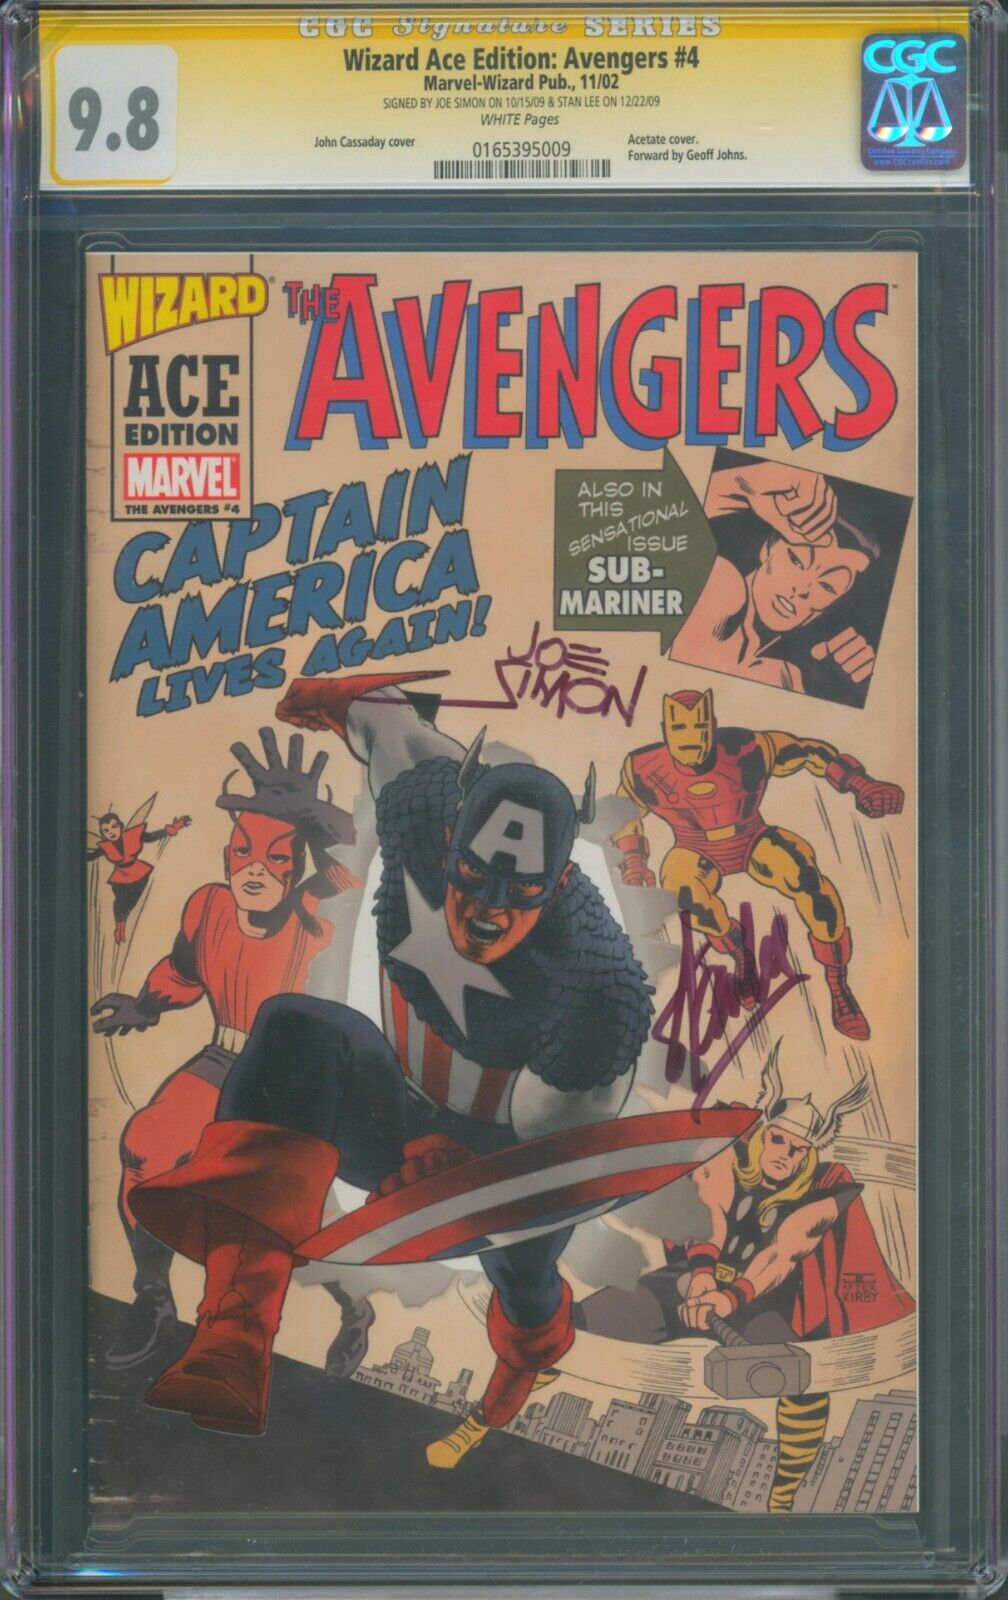 Wizard Ace Edition: Avengers #4 (2002) ⭐ 2X SIGNED STAN LEE + SIMON ⭐ CGC 9.8 SS